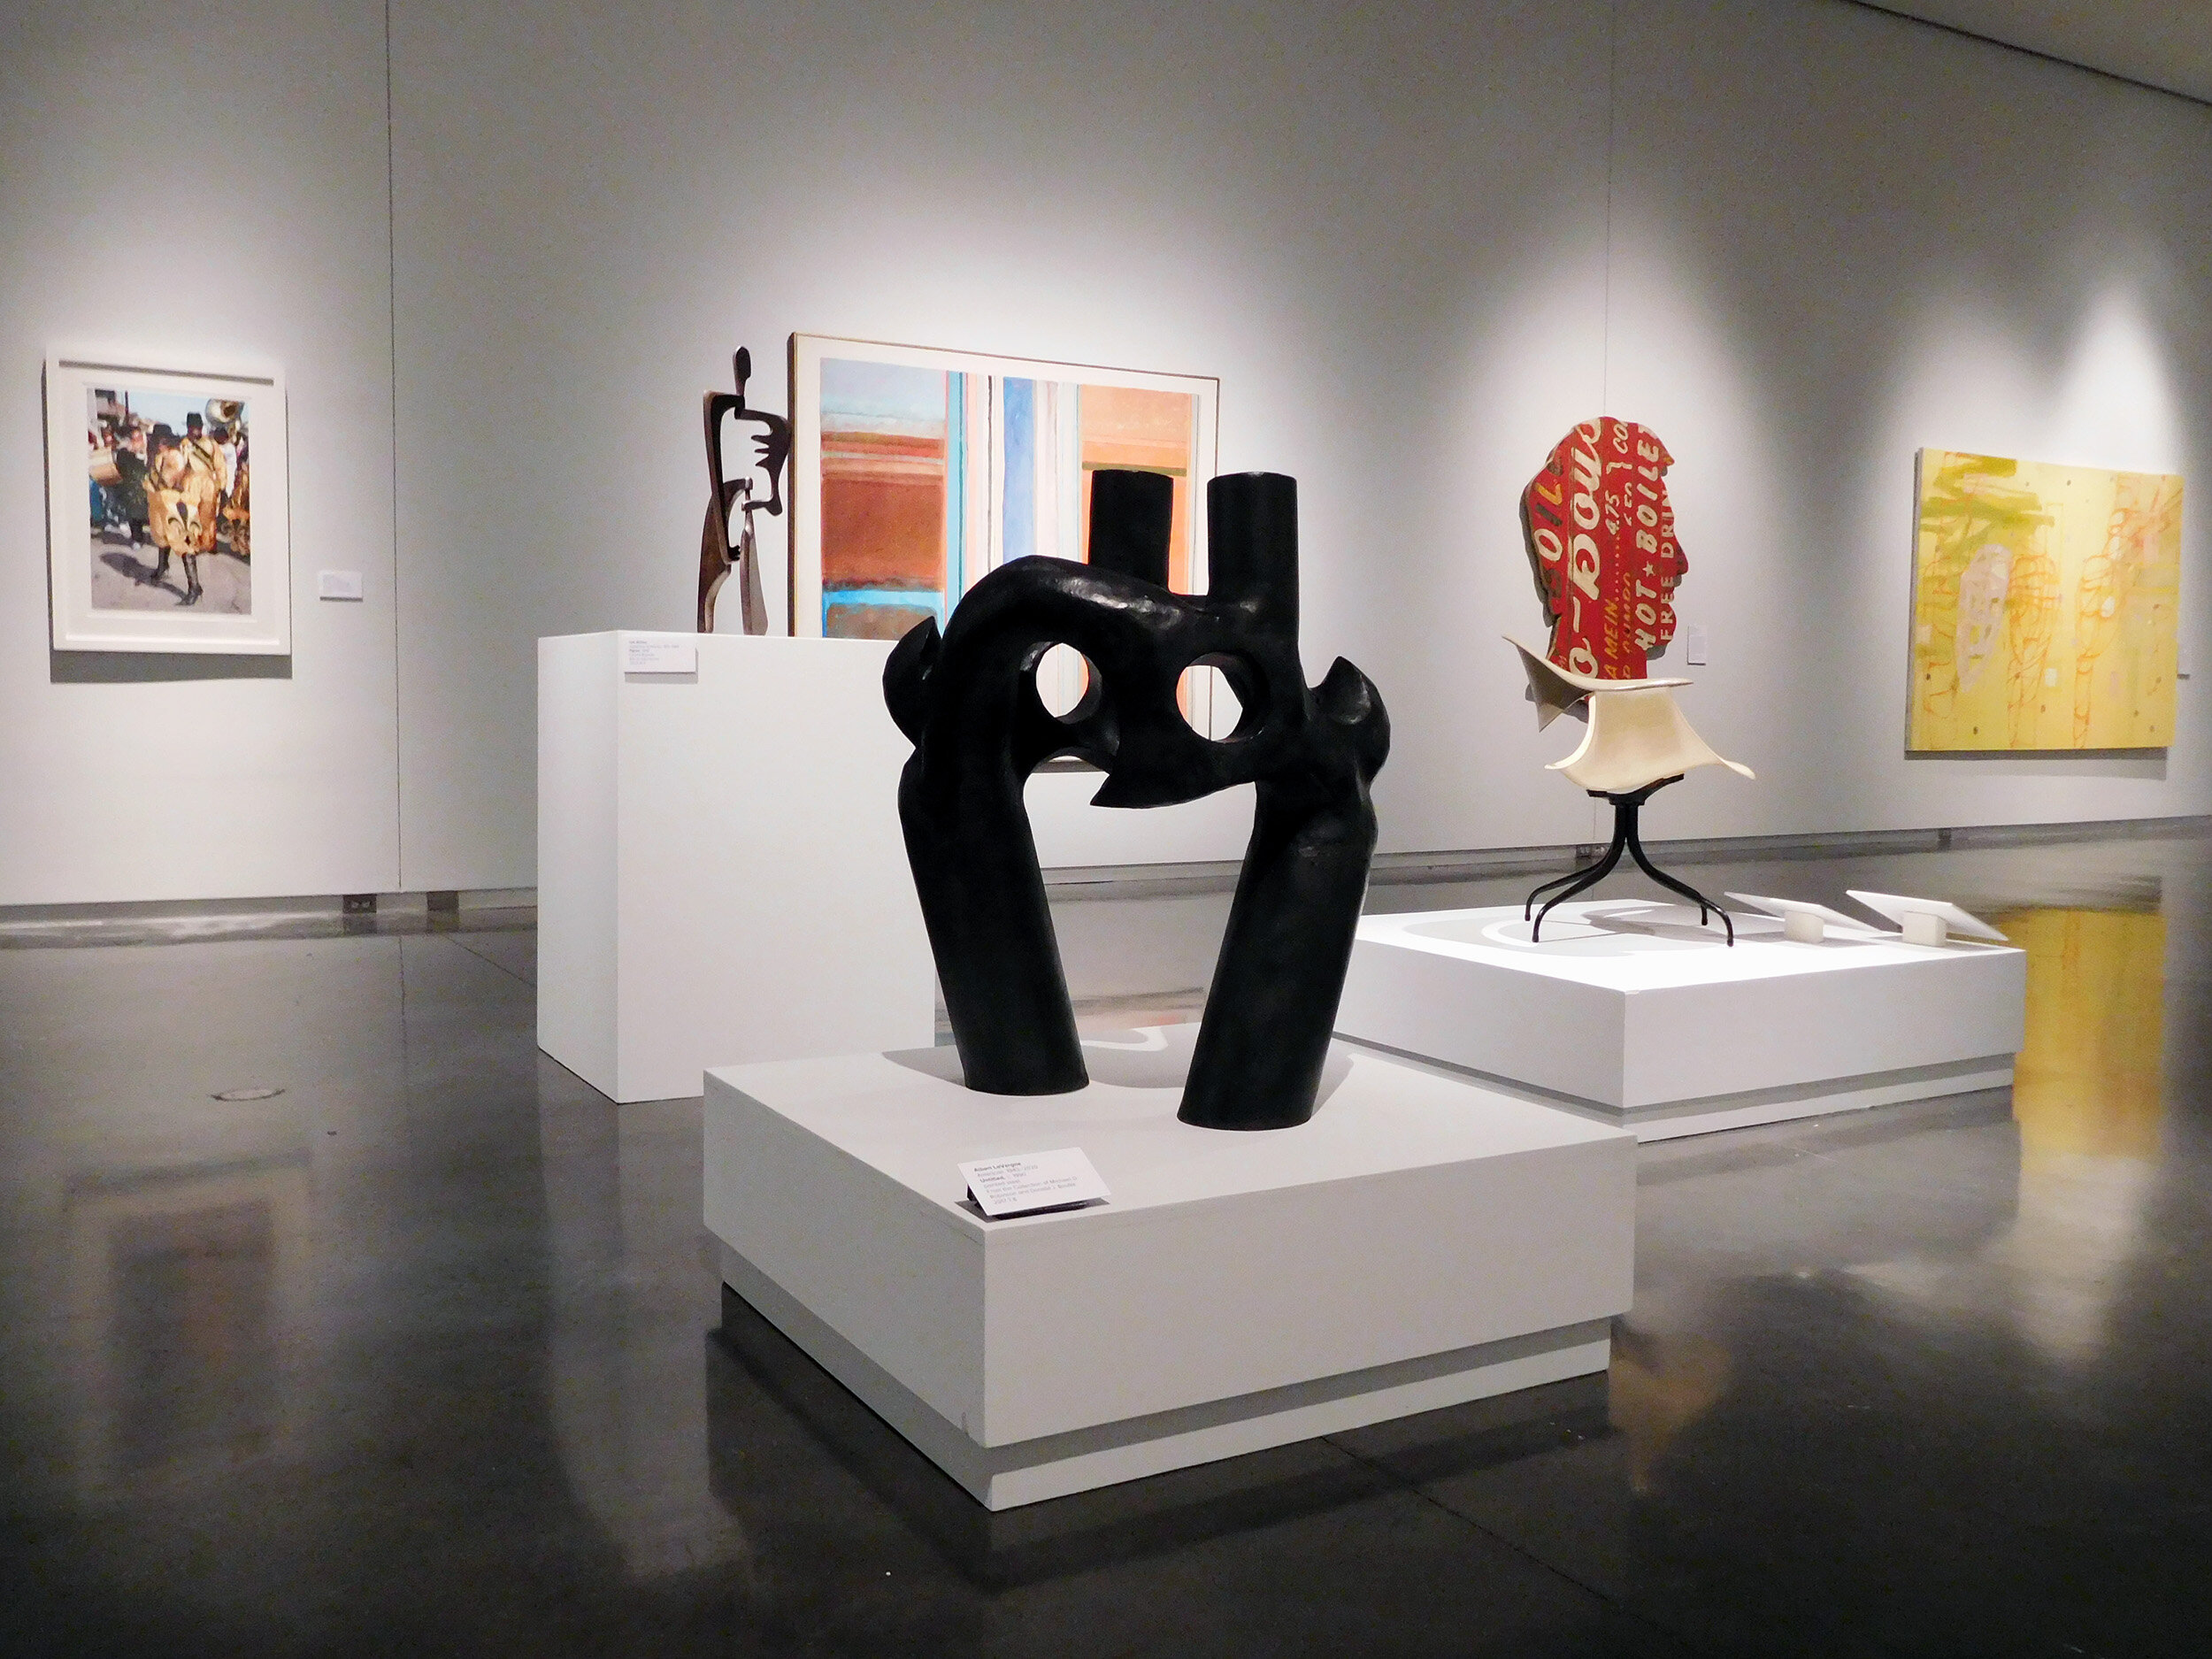   Al LaVergne’s  Untitled  sculpture conserved and now on view in LSU MOA’s Art in Louisiana Contemporary Gallery. 